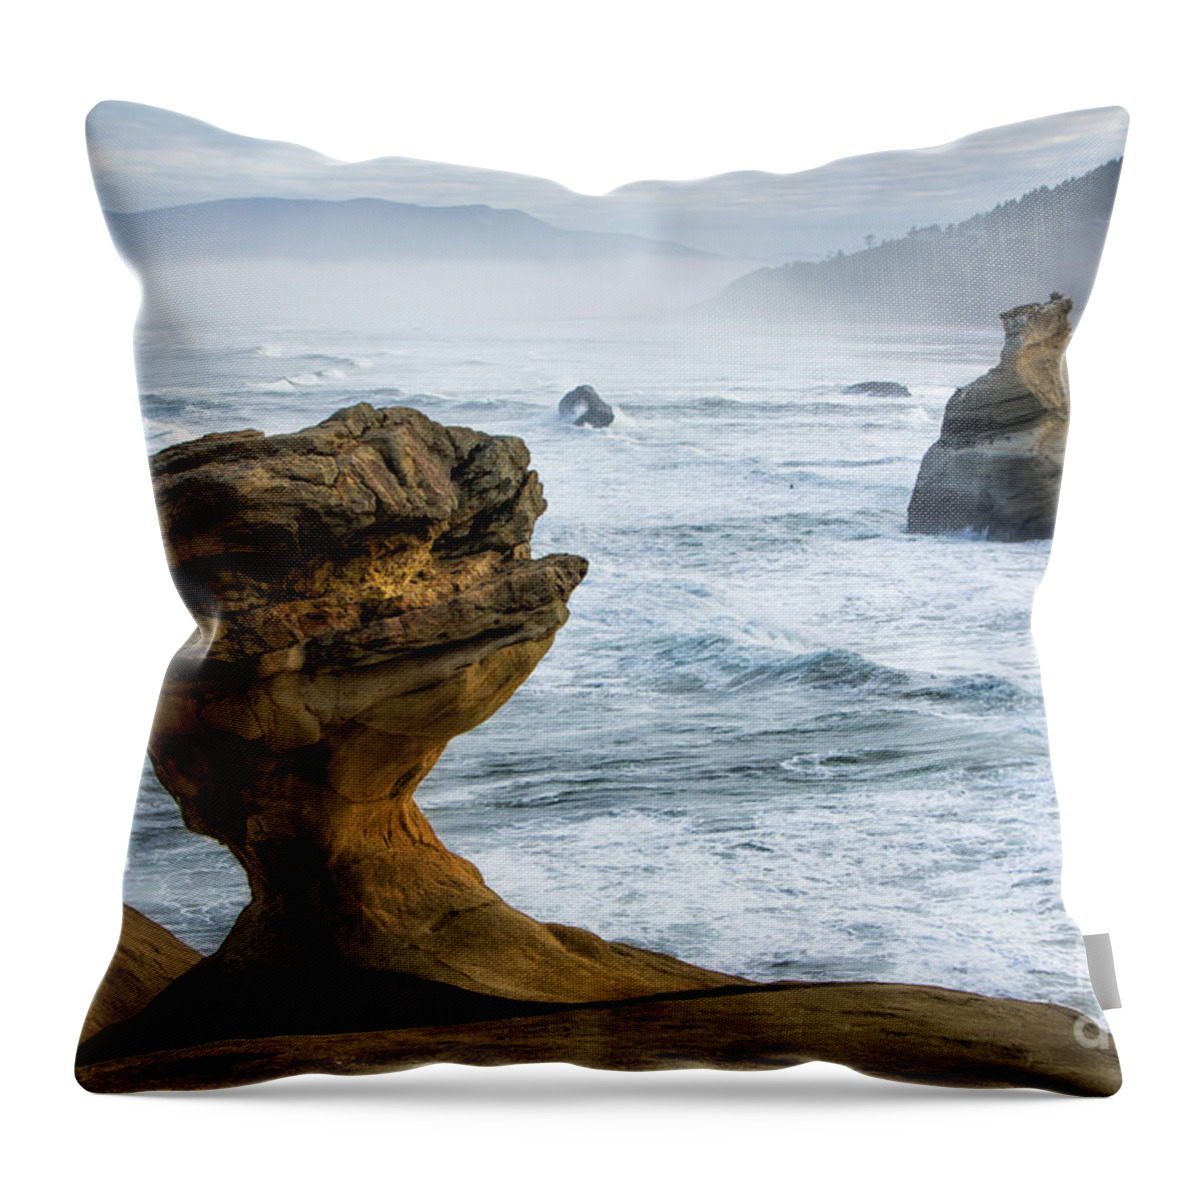  Oregon Throw Pillow featuring the photograph Rocky Oregon Coast 8 by Timothy Hacker